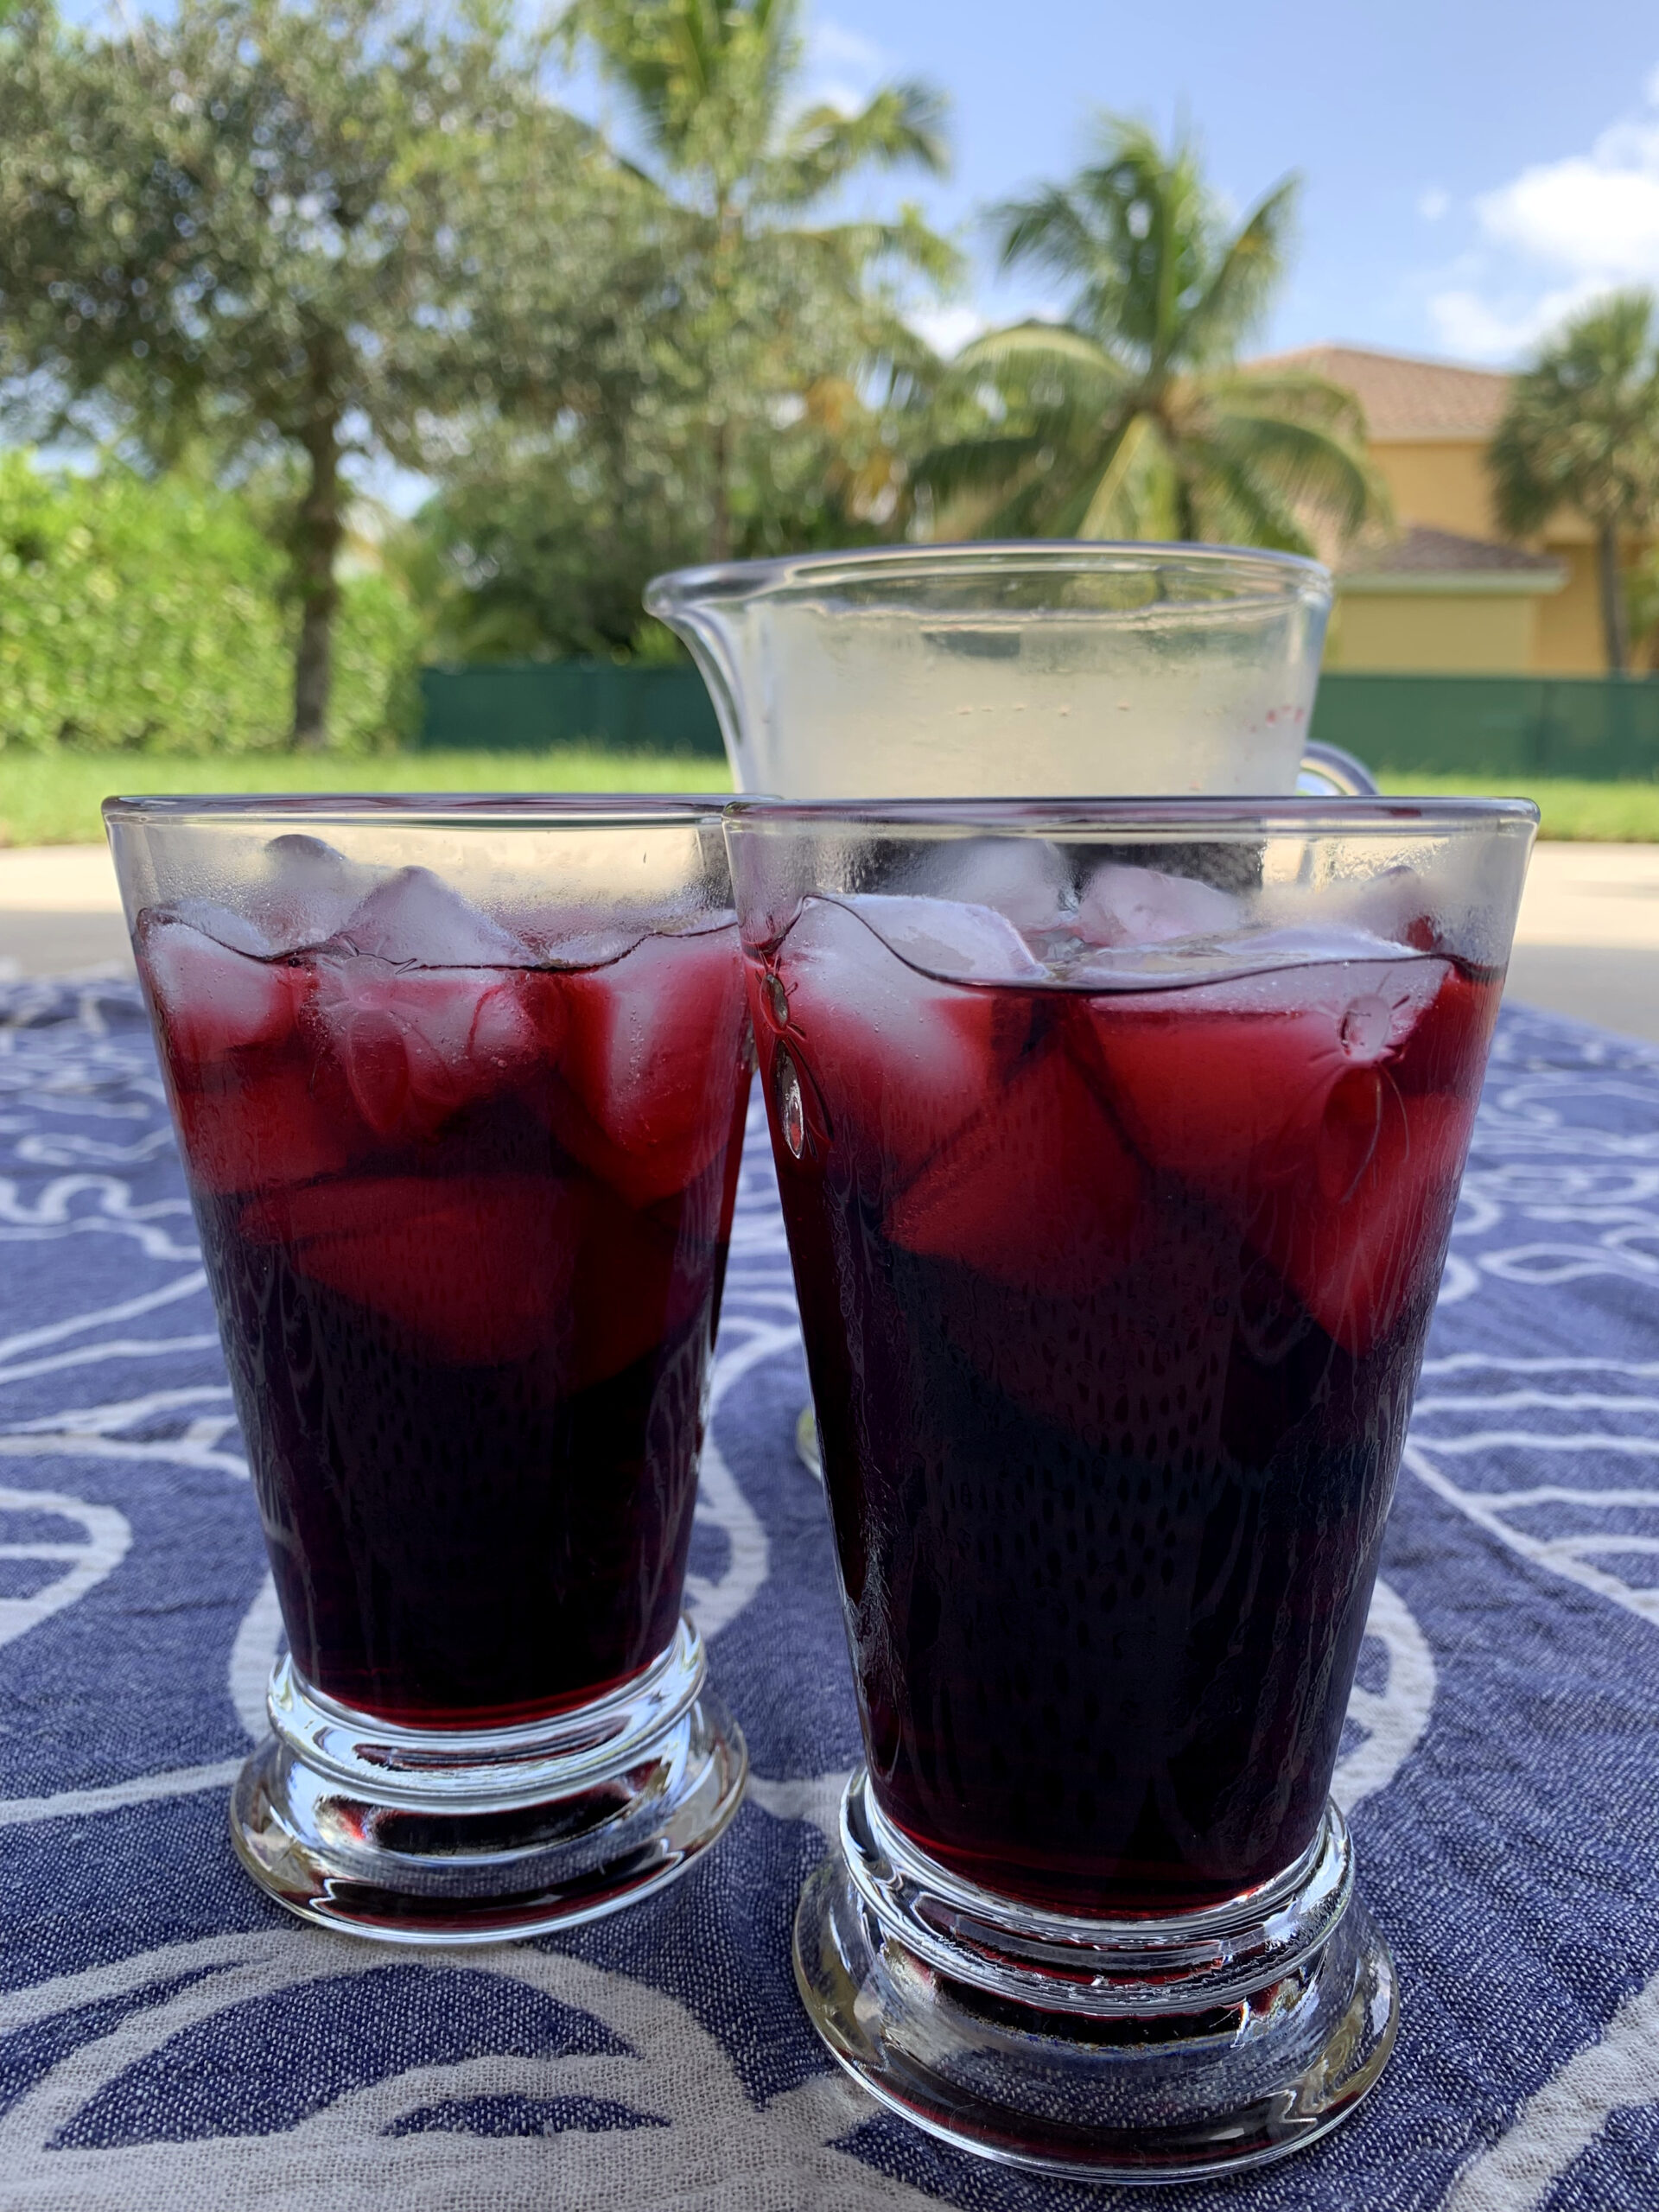 Two-Glasses-of-Hibiscus-Tea-Over-Ice